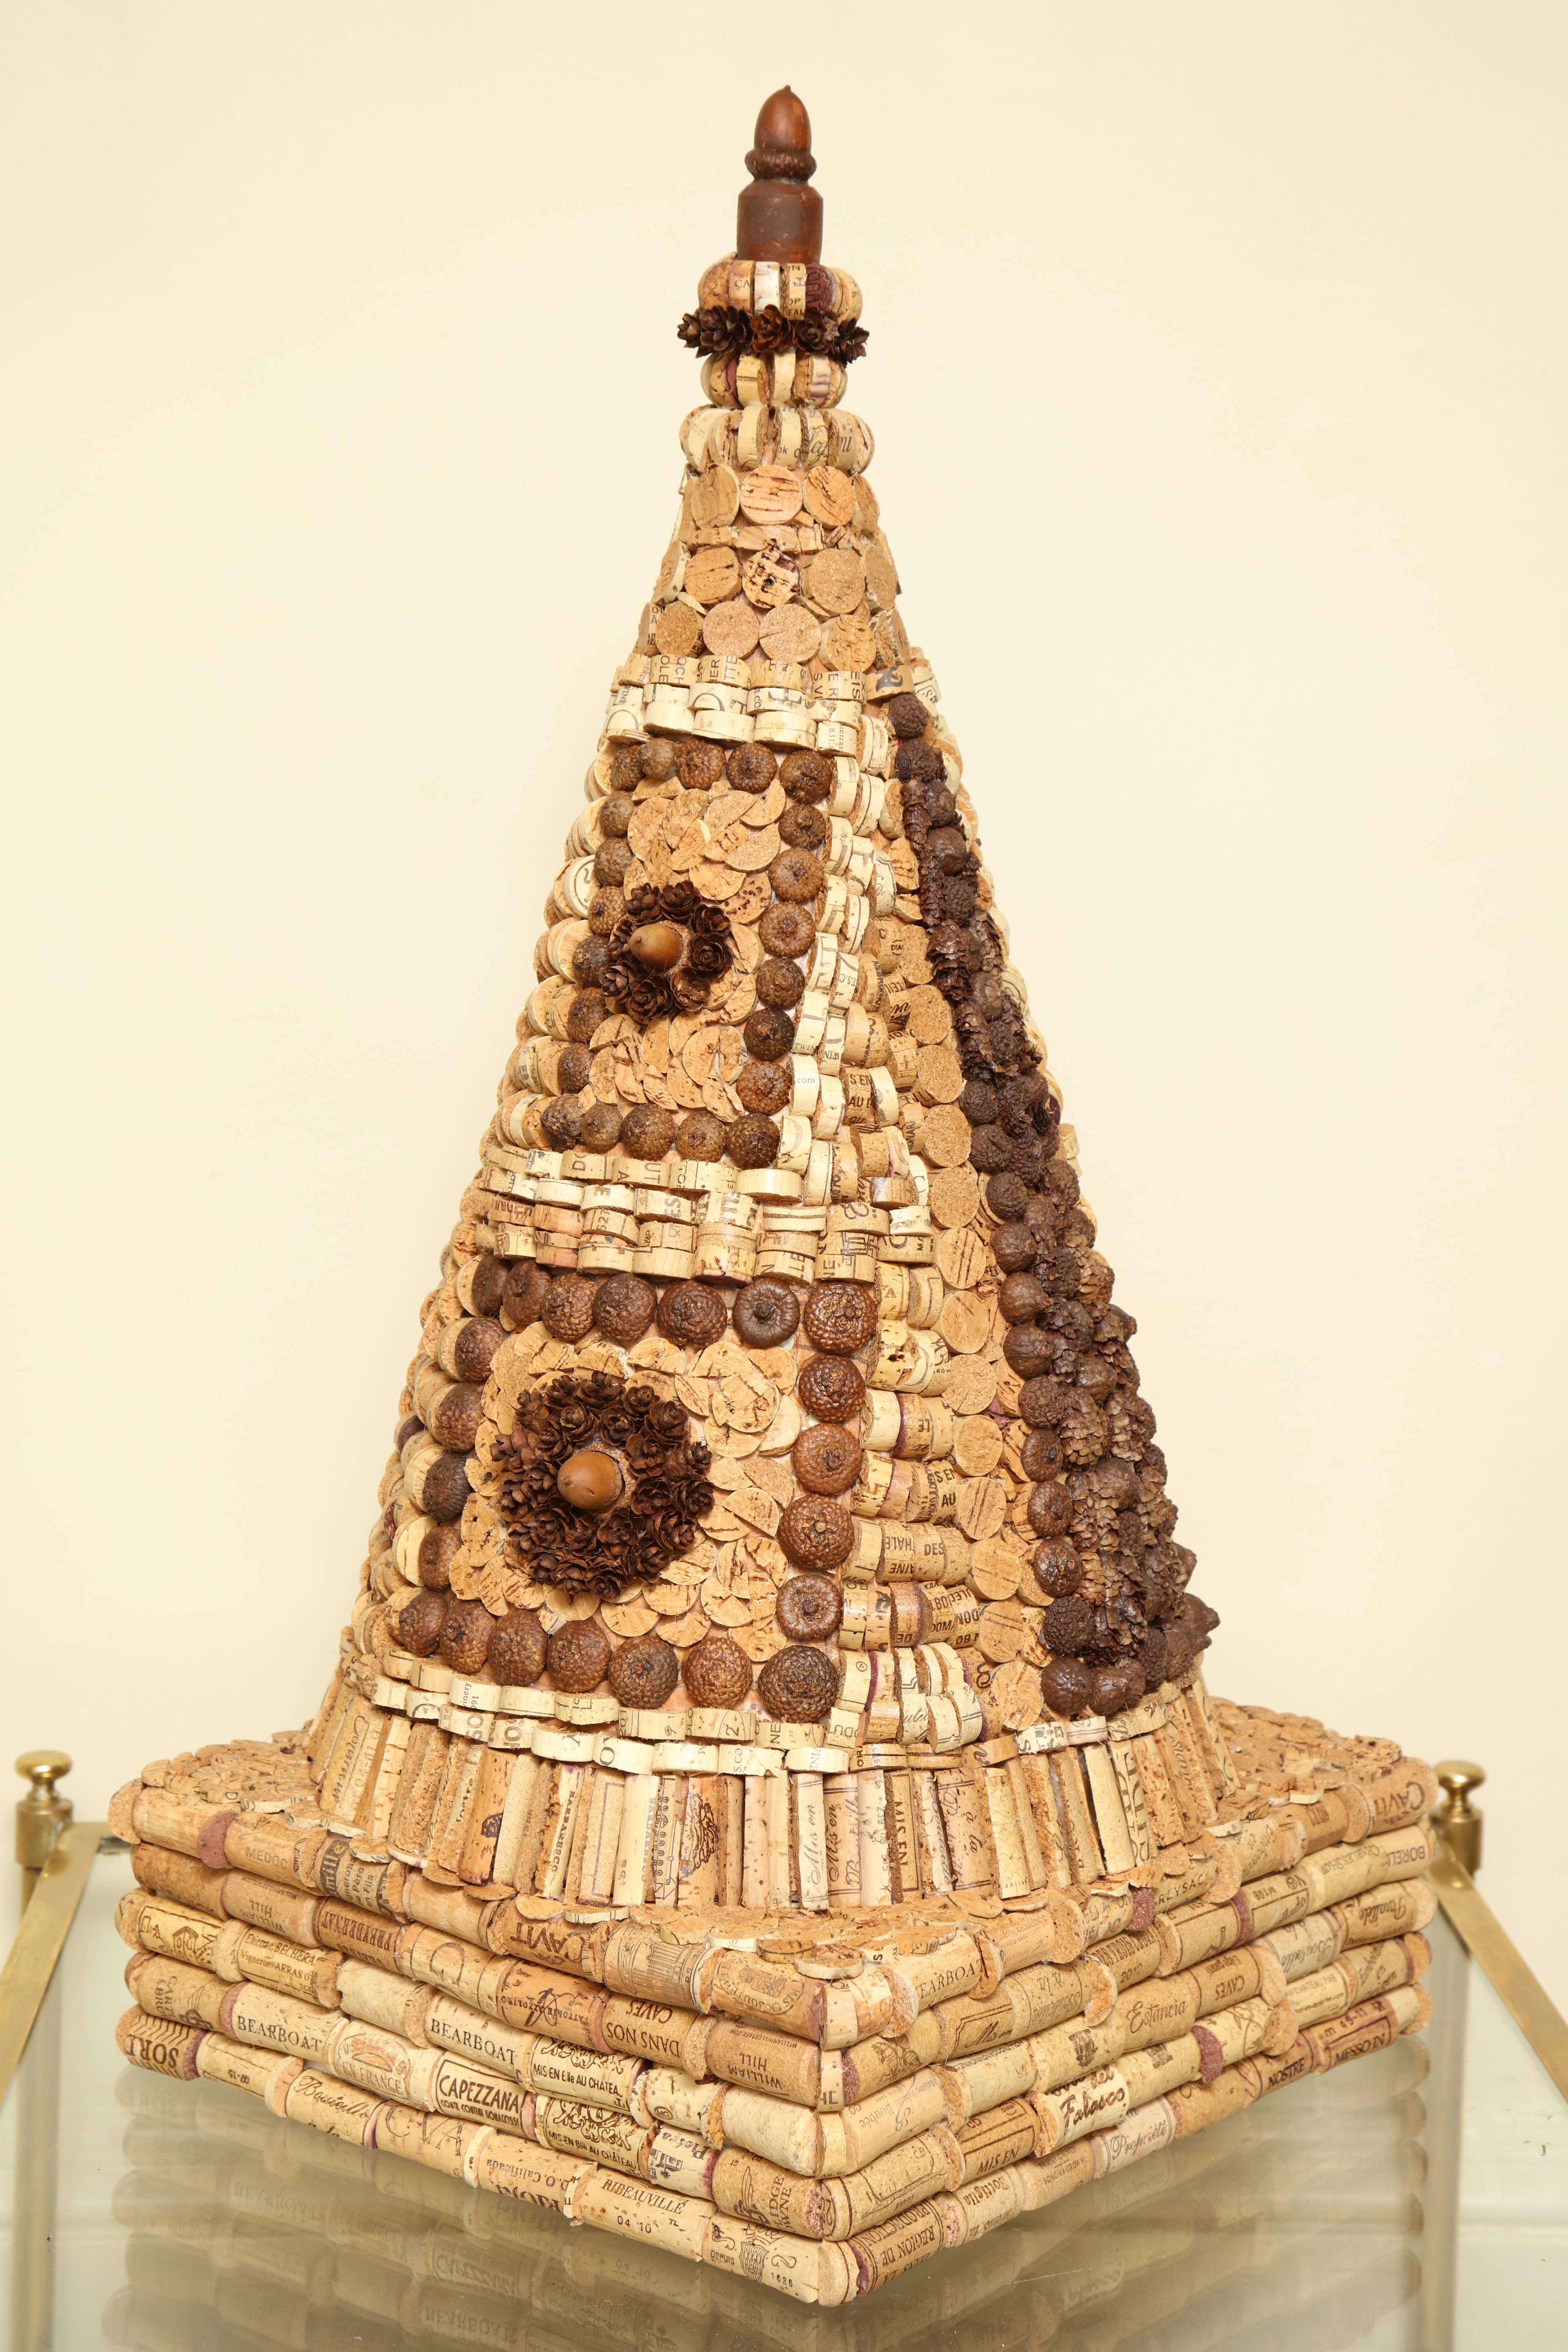 With a nod to Tramp Art, McEvoy takes spliced wine bottle corks, pinecones, and acorns to build out her architectural creations in her signature color palette of natural, white, black and red. 

Marian McEvoy lived in Paris from 1975-1990, where